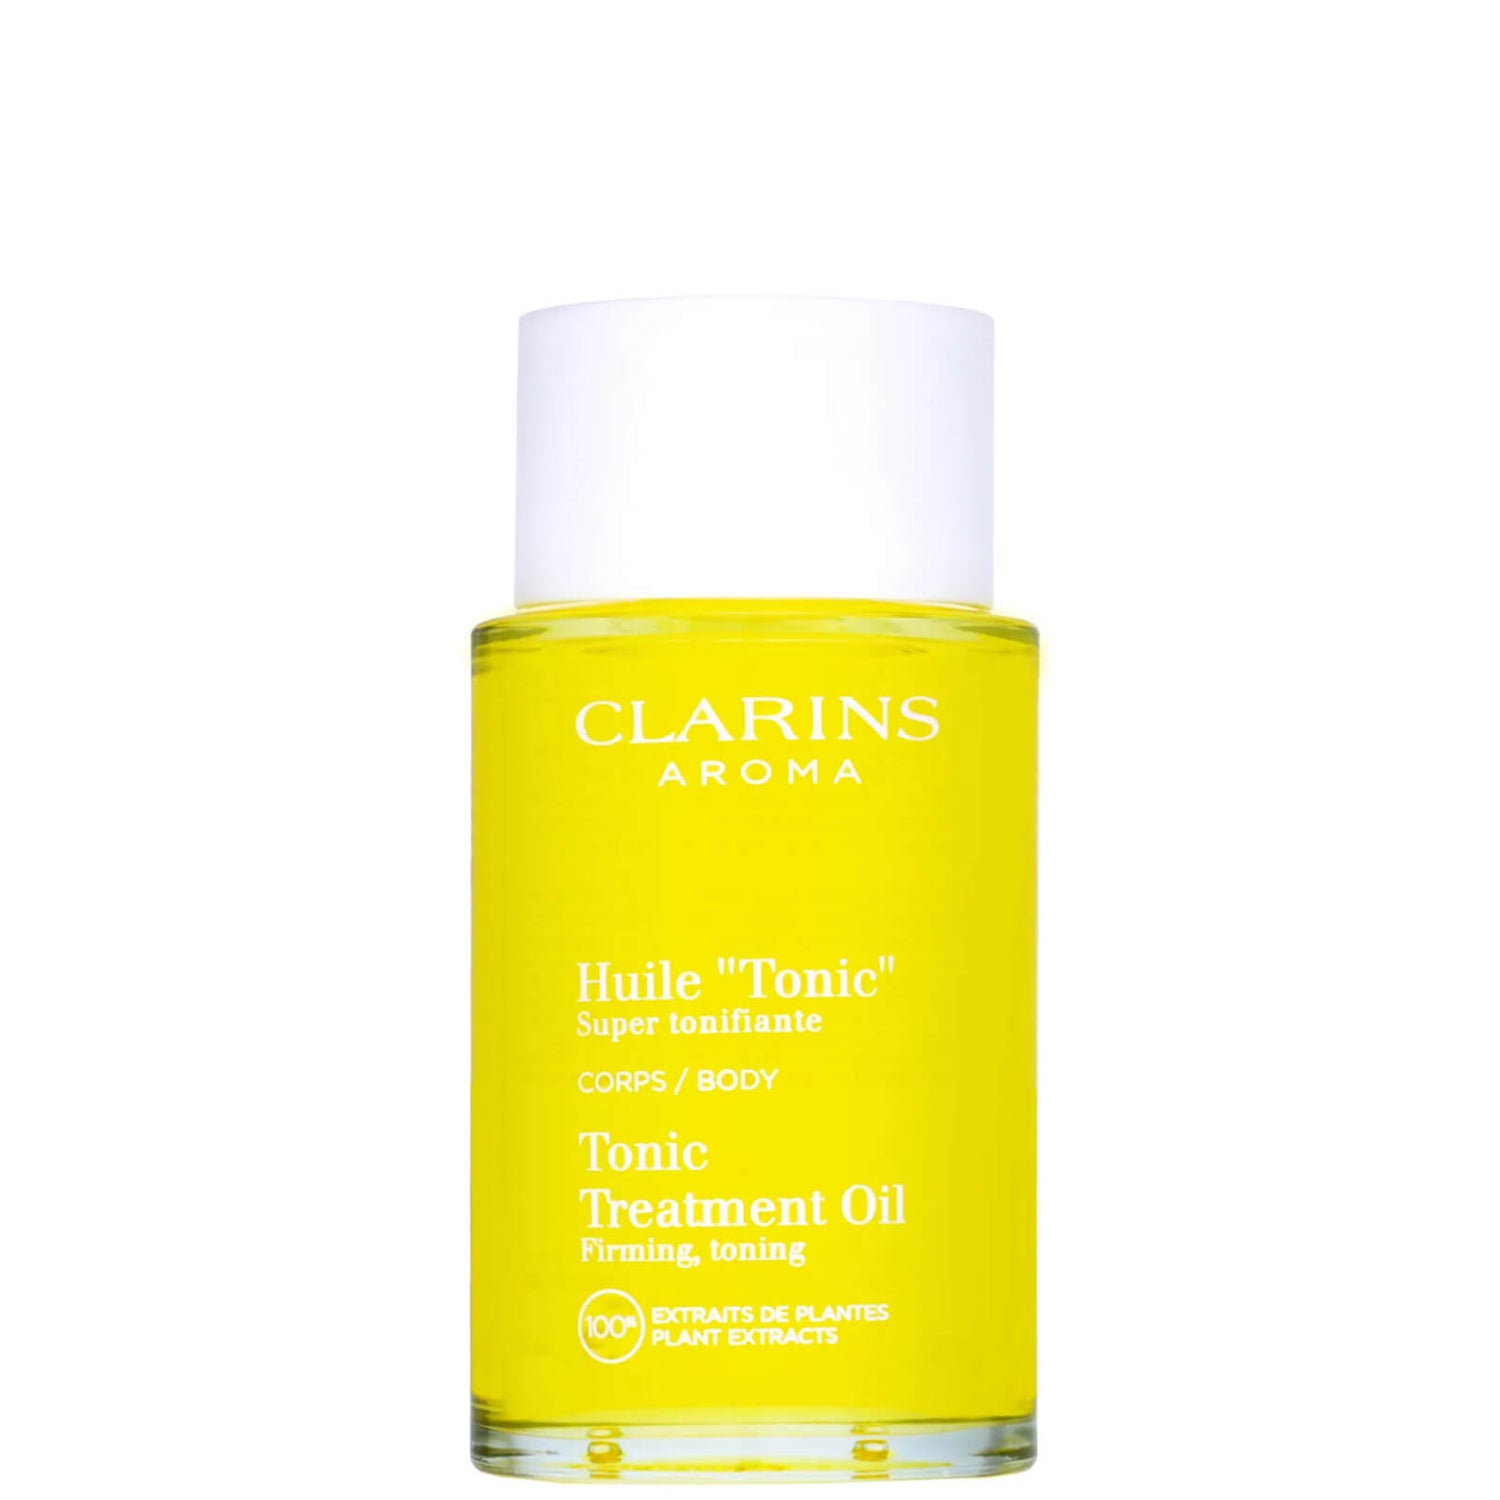 Clarins Body Treatment Oil Firming Toning (100ml)